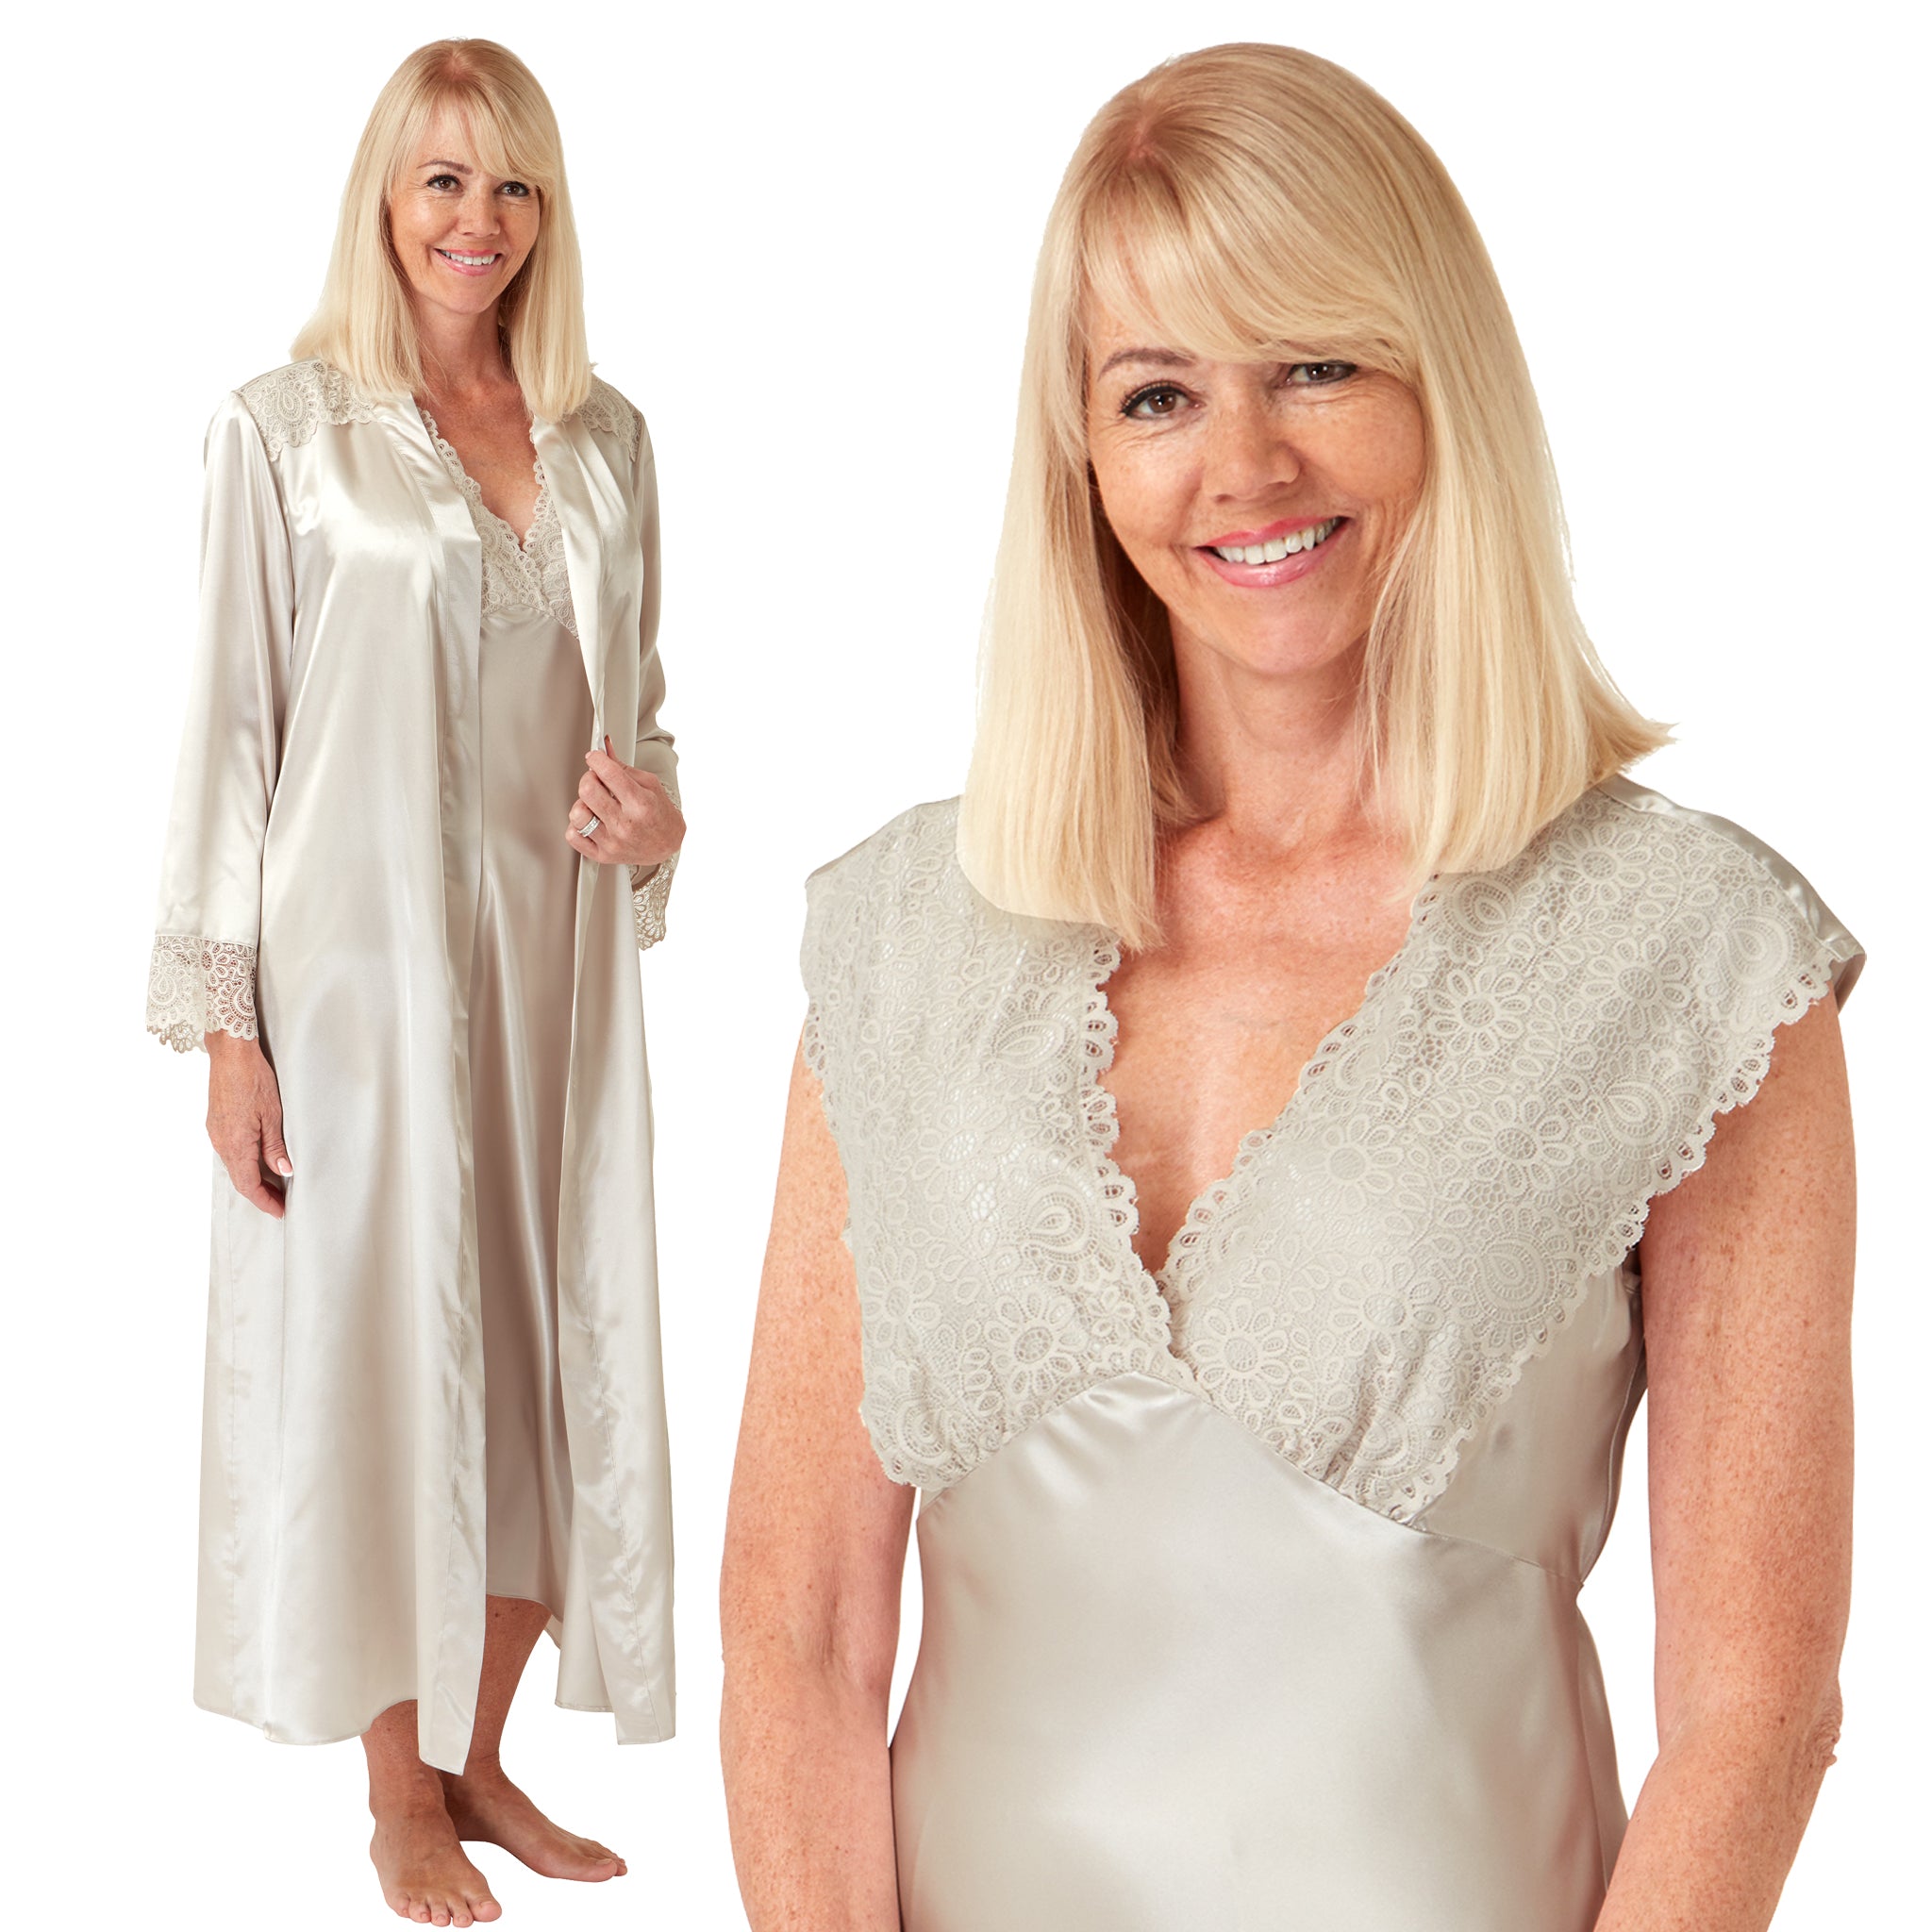 Pierre Cardin Satin Lace Nightgown and Dressing Gown Set - 4370 - Trendyol